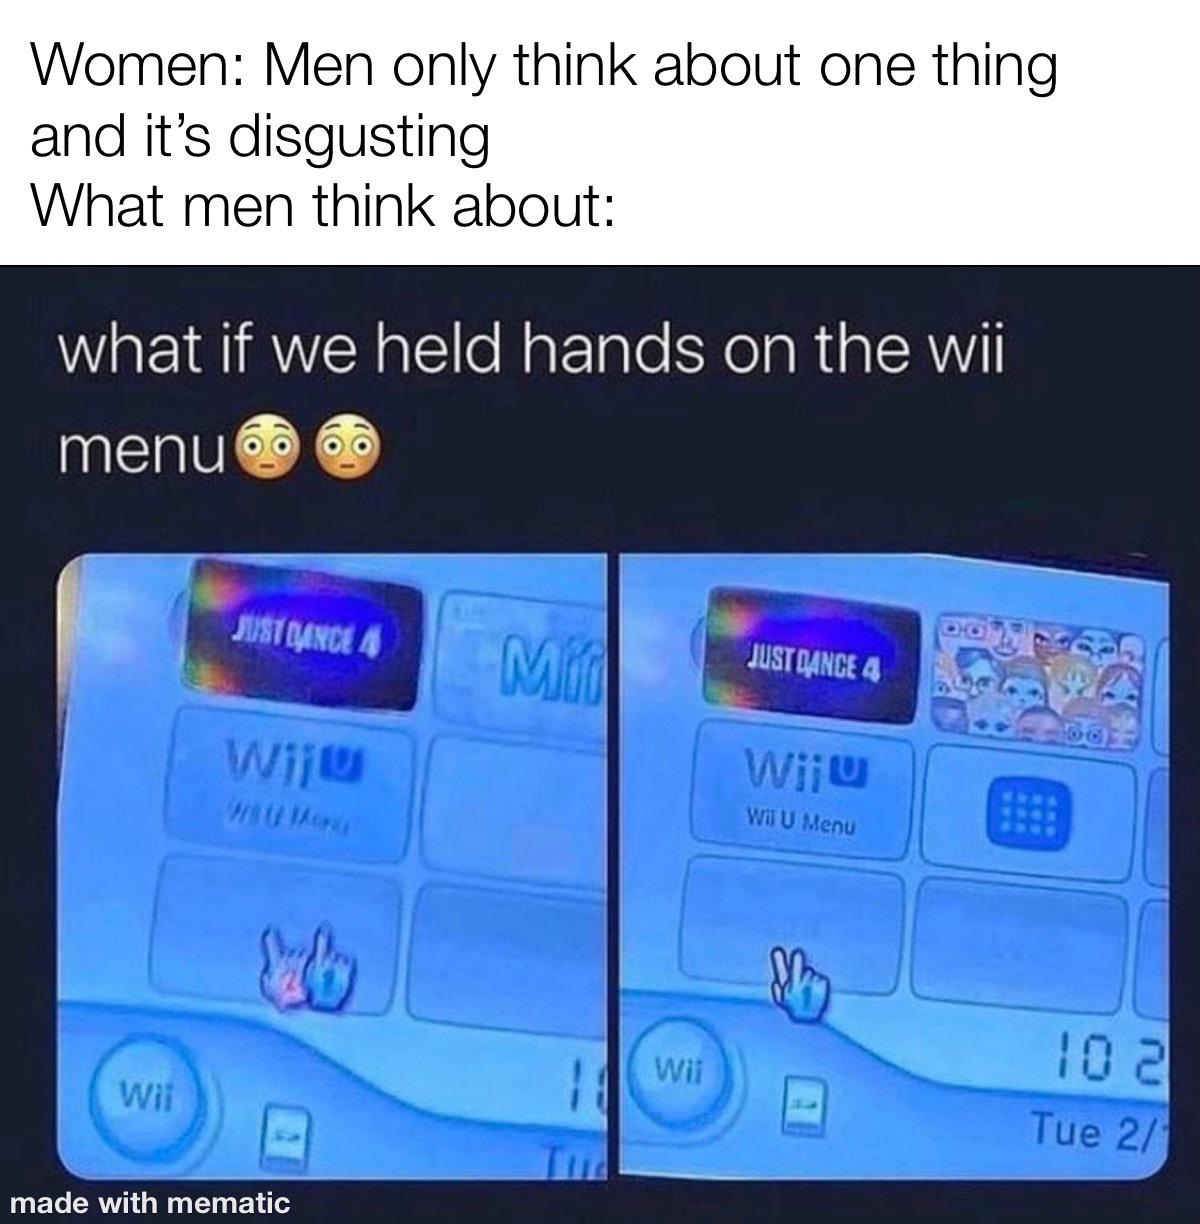 if we held hands on the wii menu - Women Men only think about one thing and it's disgusting What men think about what if we held hands on the wii menu 60 6 Just Dance A 0 Mid Just Dance 4 Wij Wiju wstone Witu Menu Lab Wii wit 11 10 2 Tue 2 made with memat